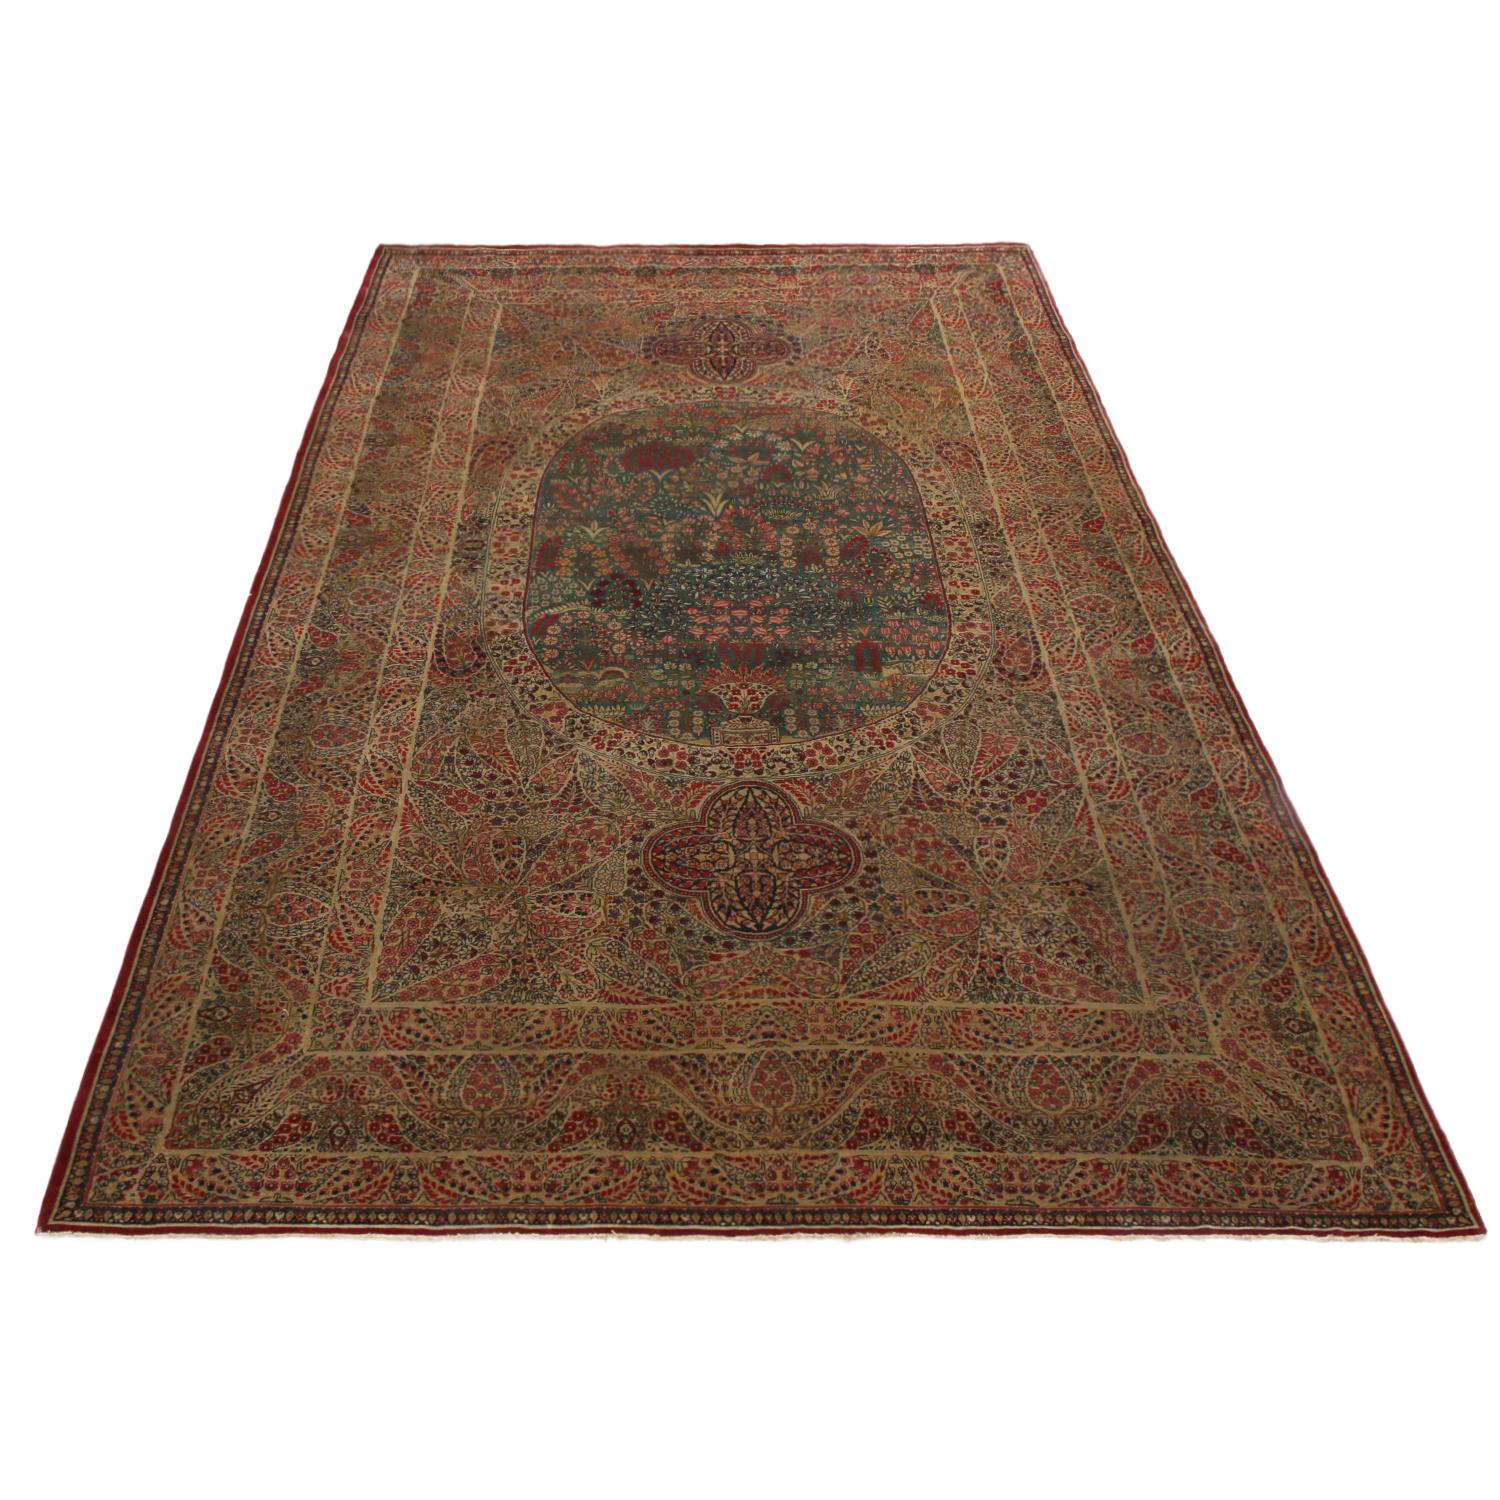 Originating from Persia in 1890, this antique Kerman Lavar Persian rug hails from one of the most famed cities of Persian rug making, enjoying a mille field pattern with fine and lively burgundy red, frost blue, purple, green and silver-beige